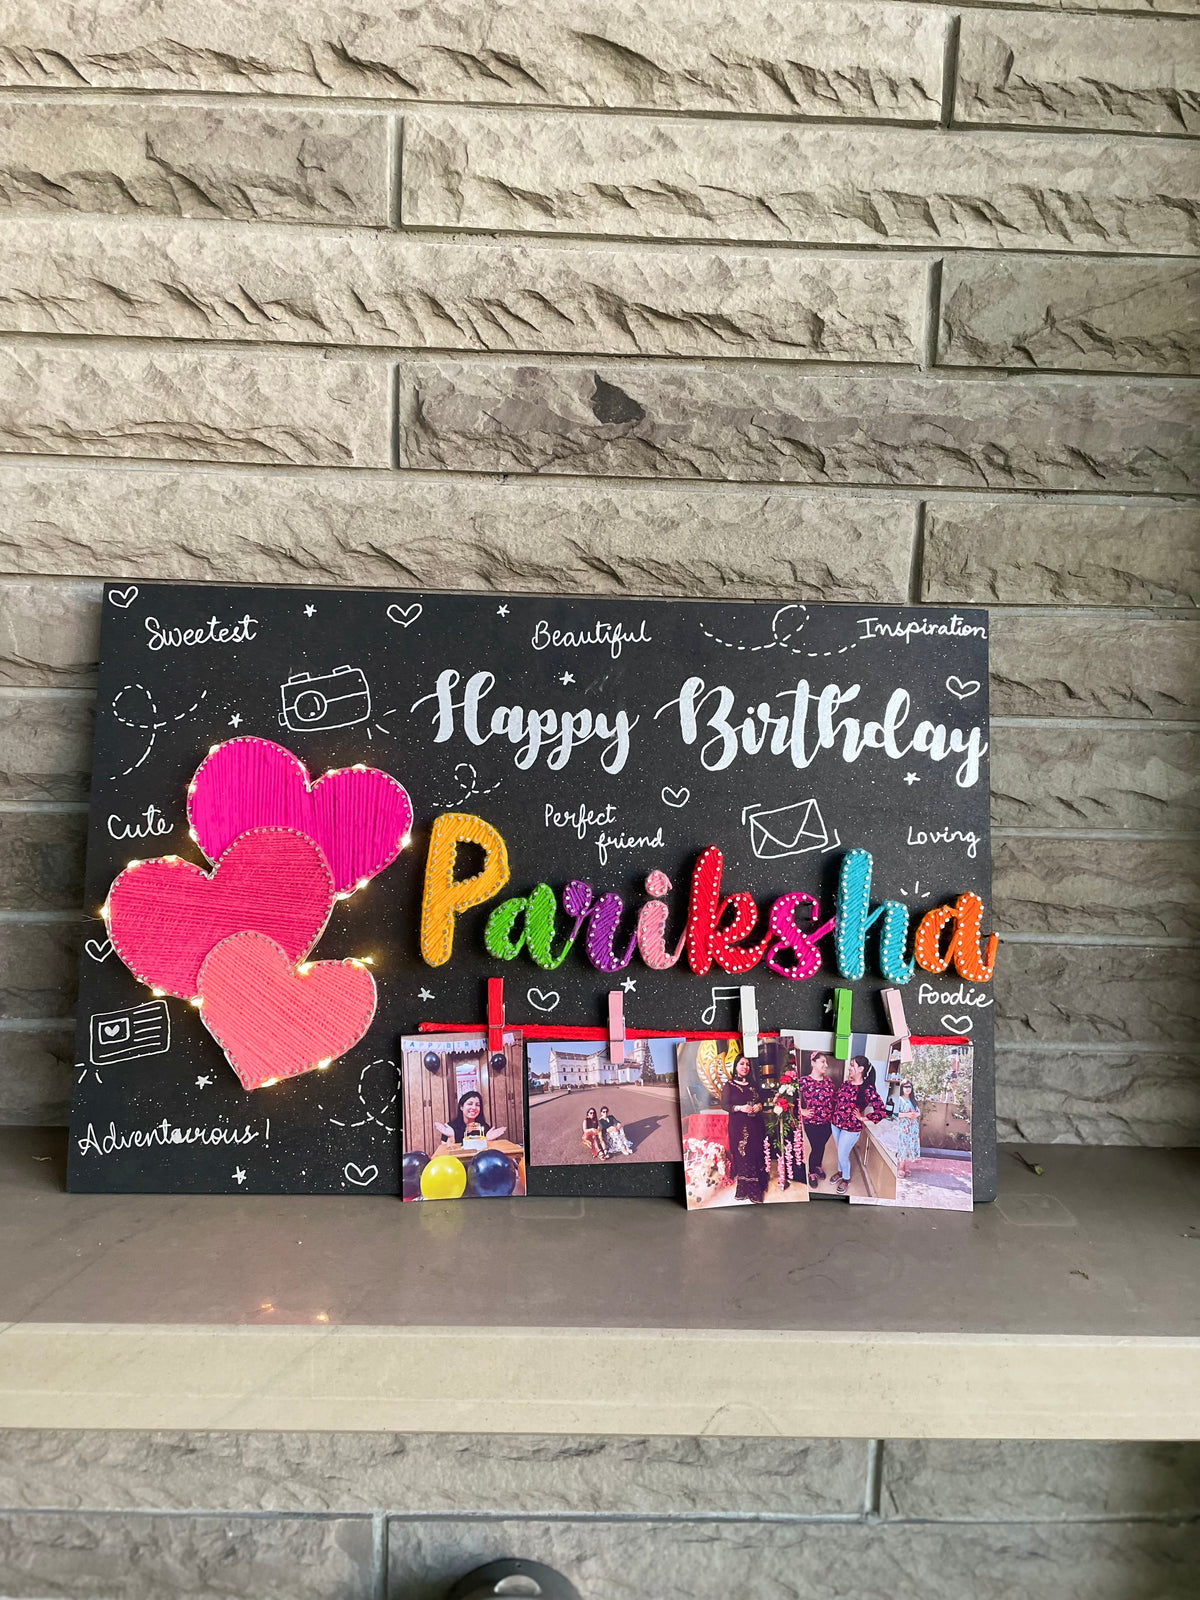 Birthday String Art Board With Pink Hearts